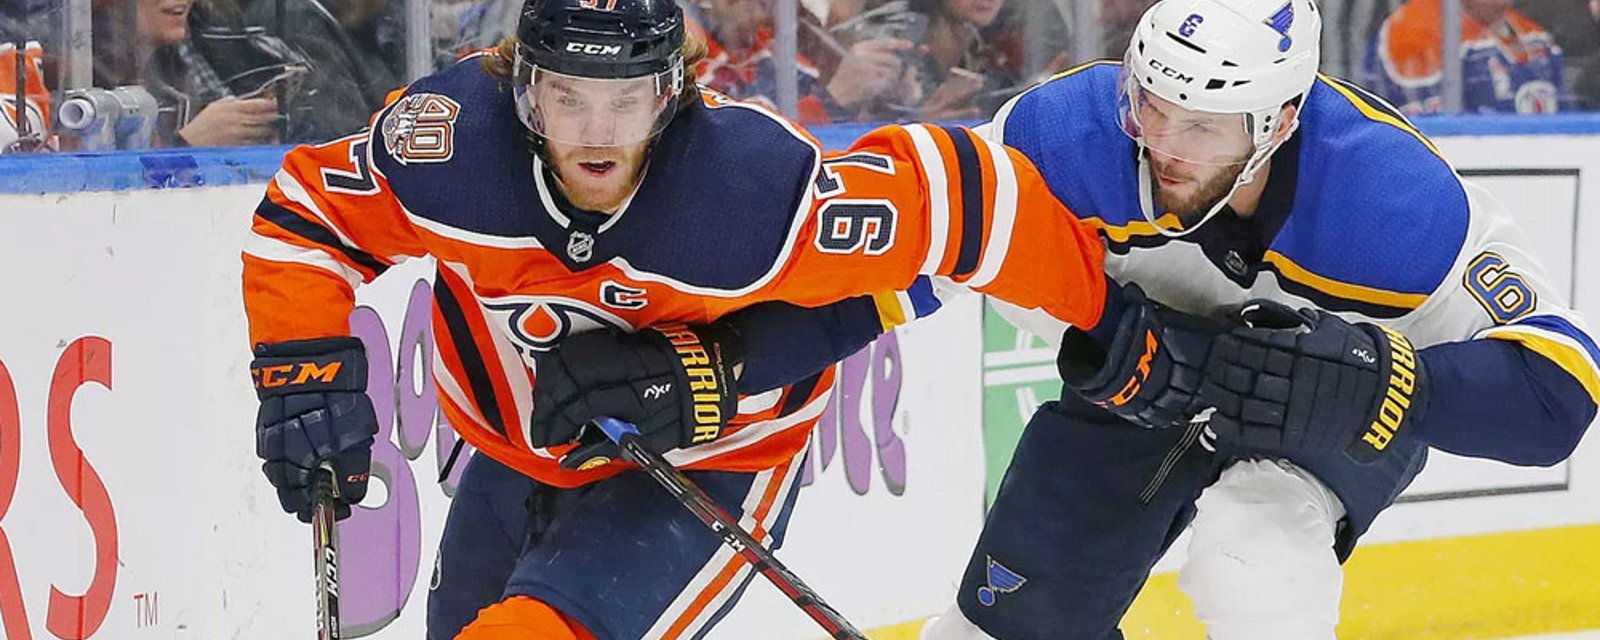 Oilers promote Gagner to top line as they host the Blues